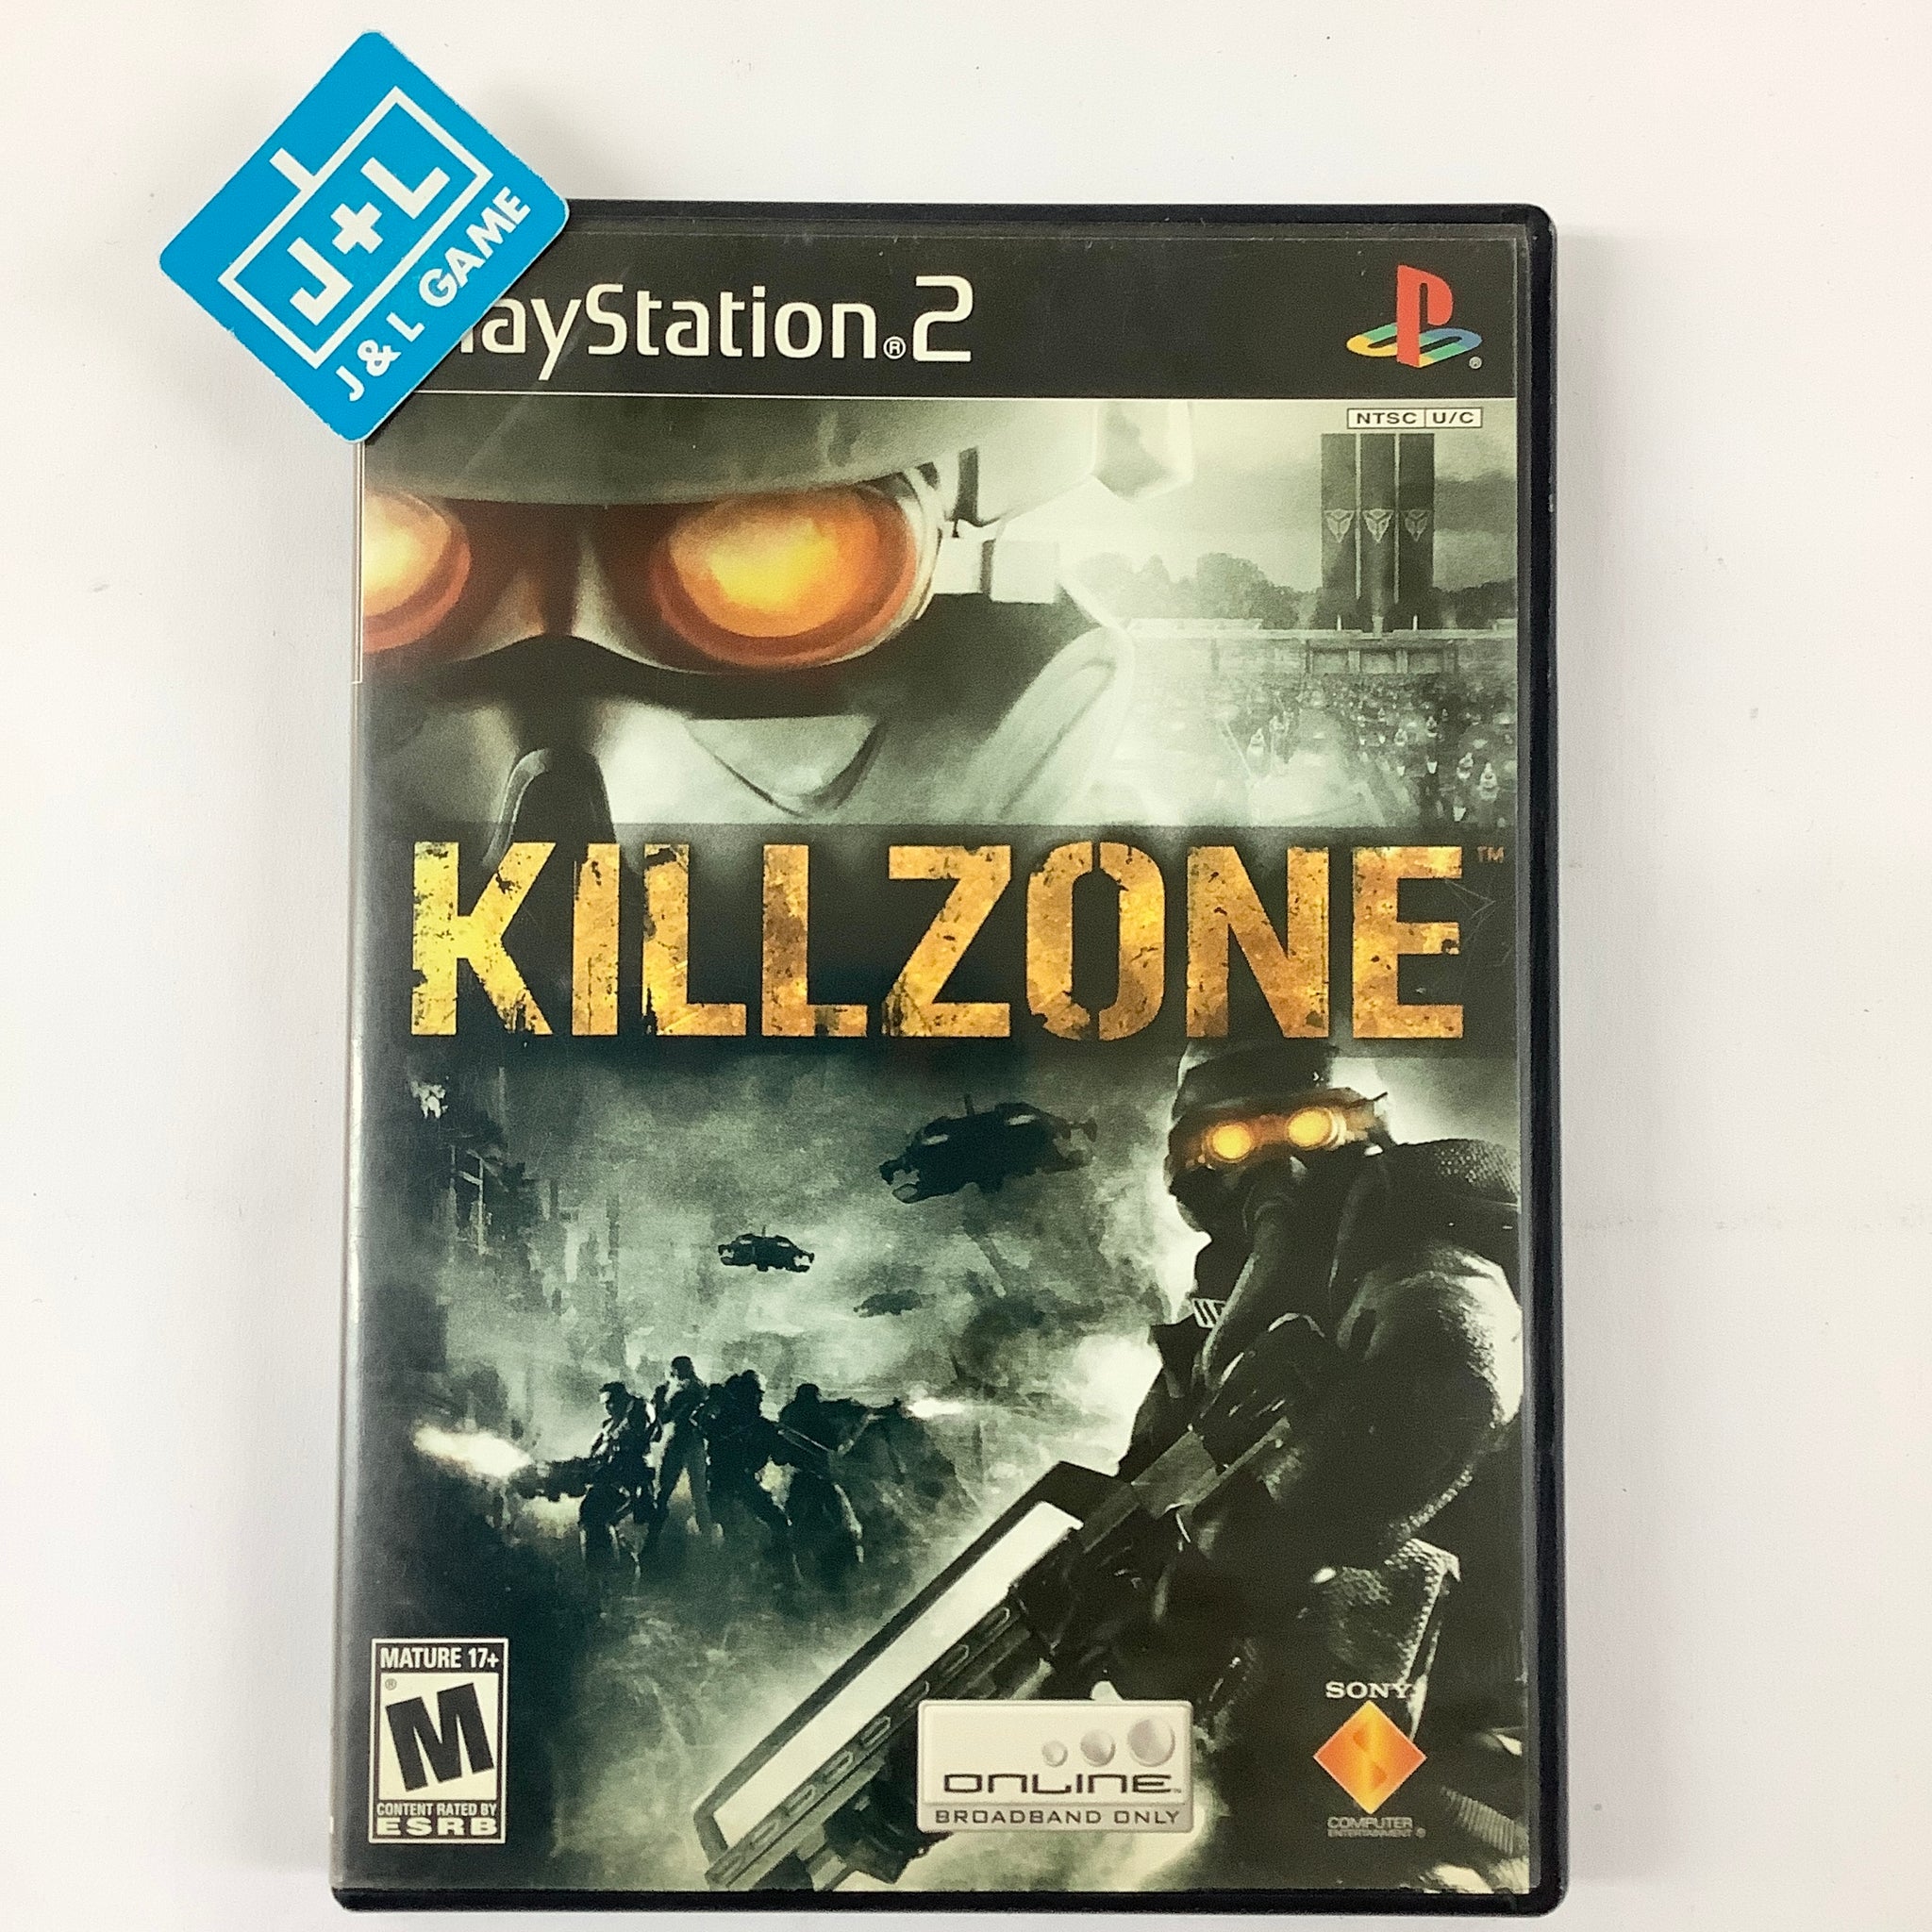 Killzone 3 (PS3) - Pre-Owned 